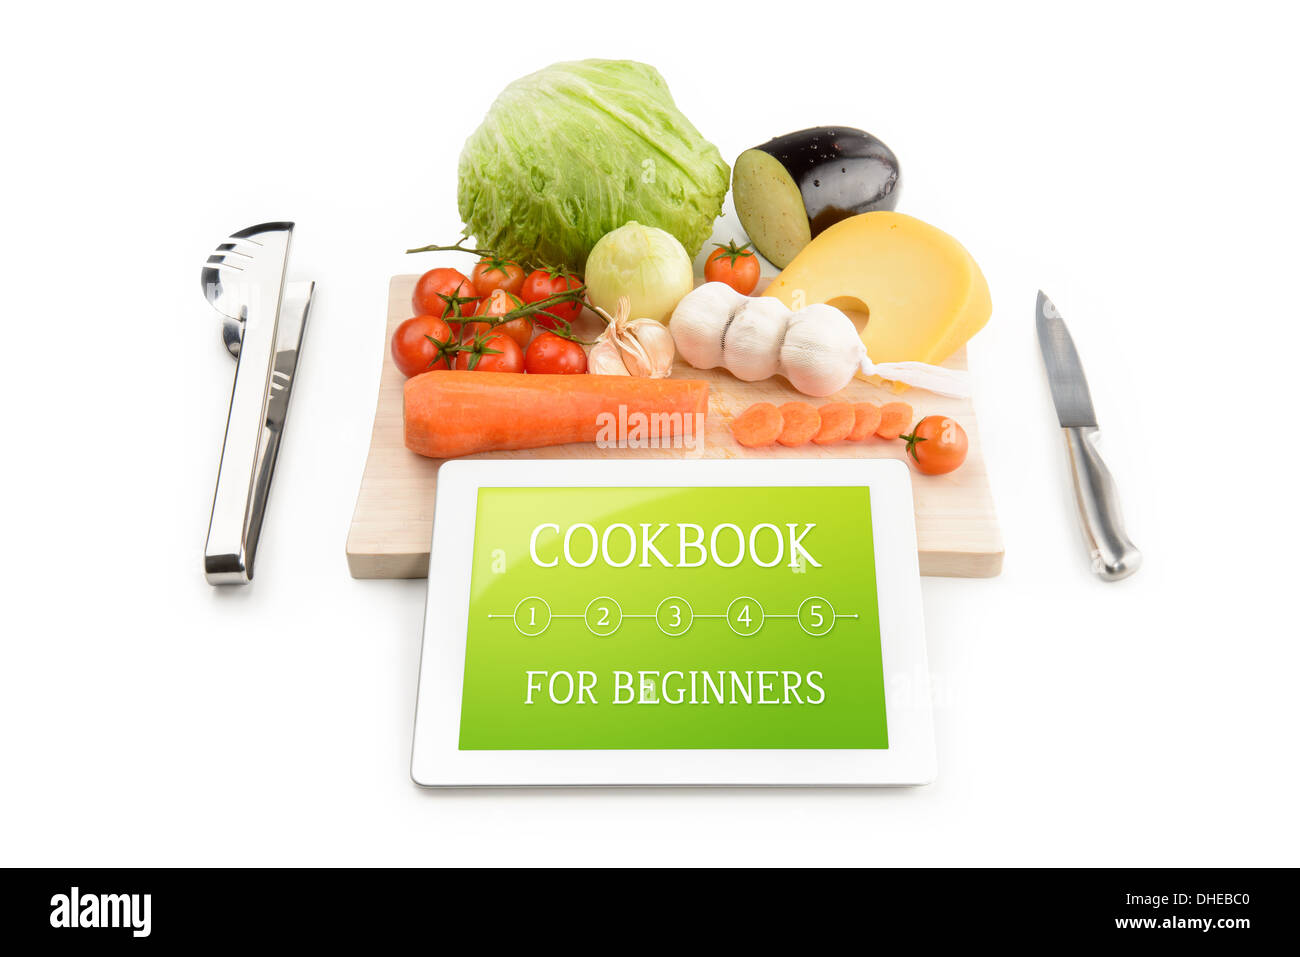 Concept of cookbook for beginners on the tablet computer. Near the tablet computer is a cutting board, cutlery and food. Stock Photo